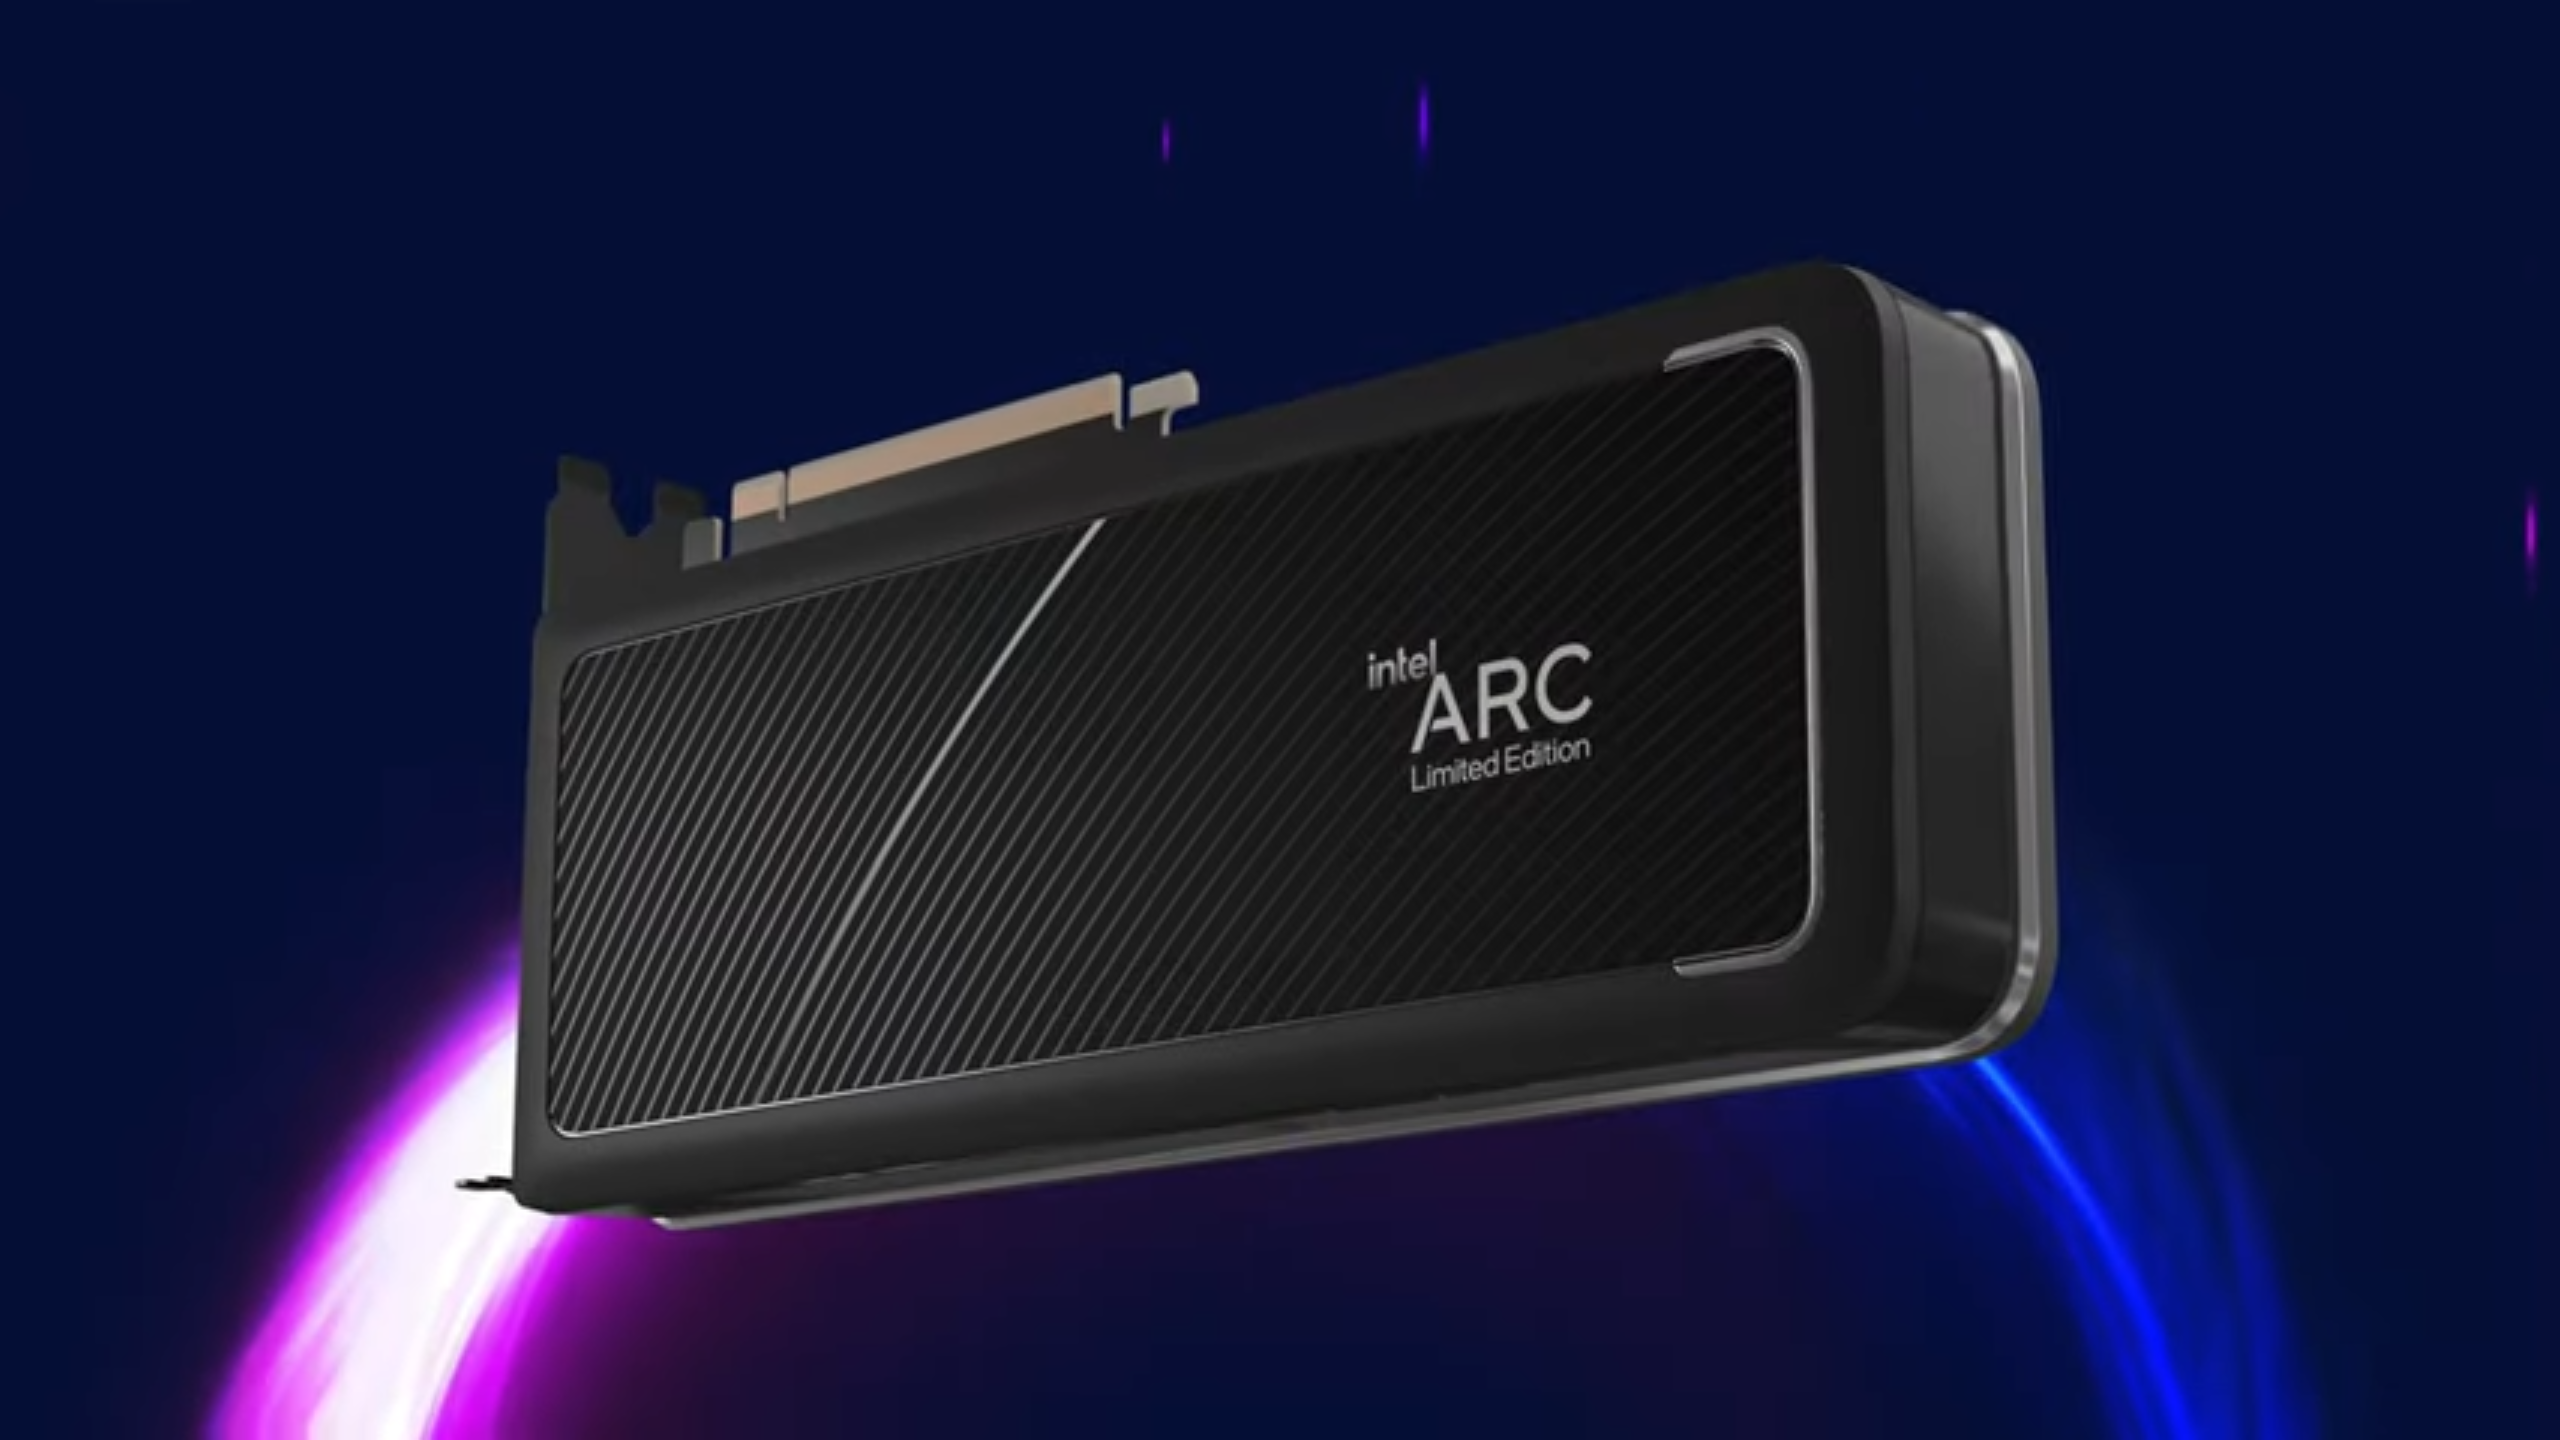 Arc A750 desktop card trades blows with the Nvidia GeForce RTX 3060 first-party gaming benchmarks - NotebookCheck.net News